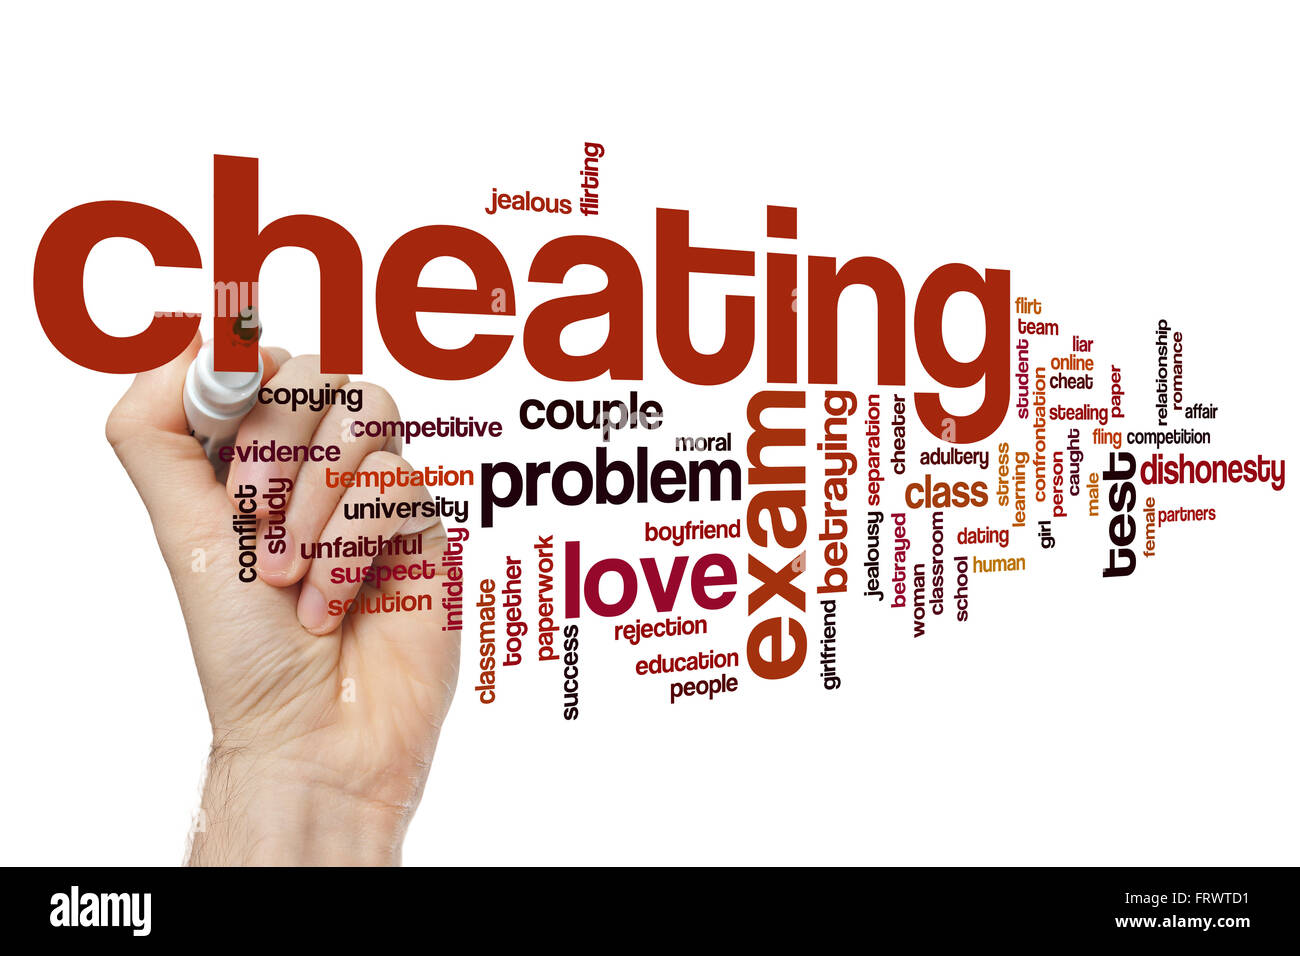 Cheating concept word cloud background Stock Photo